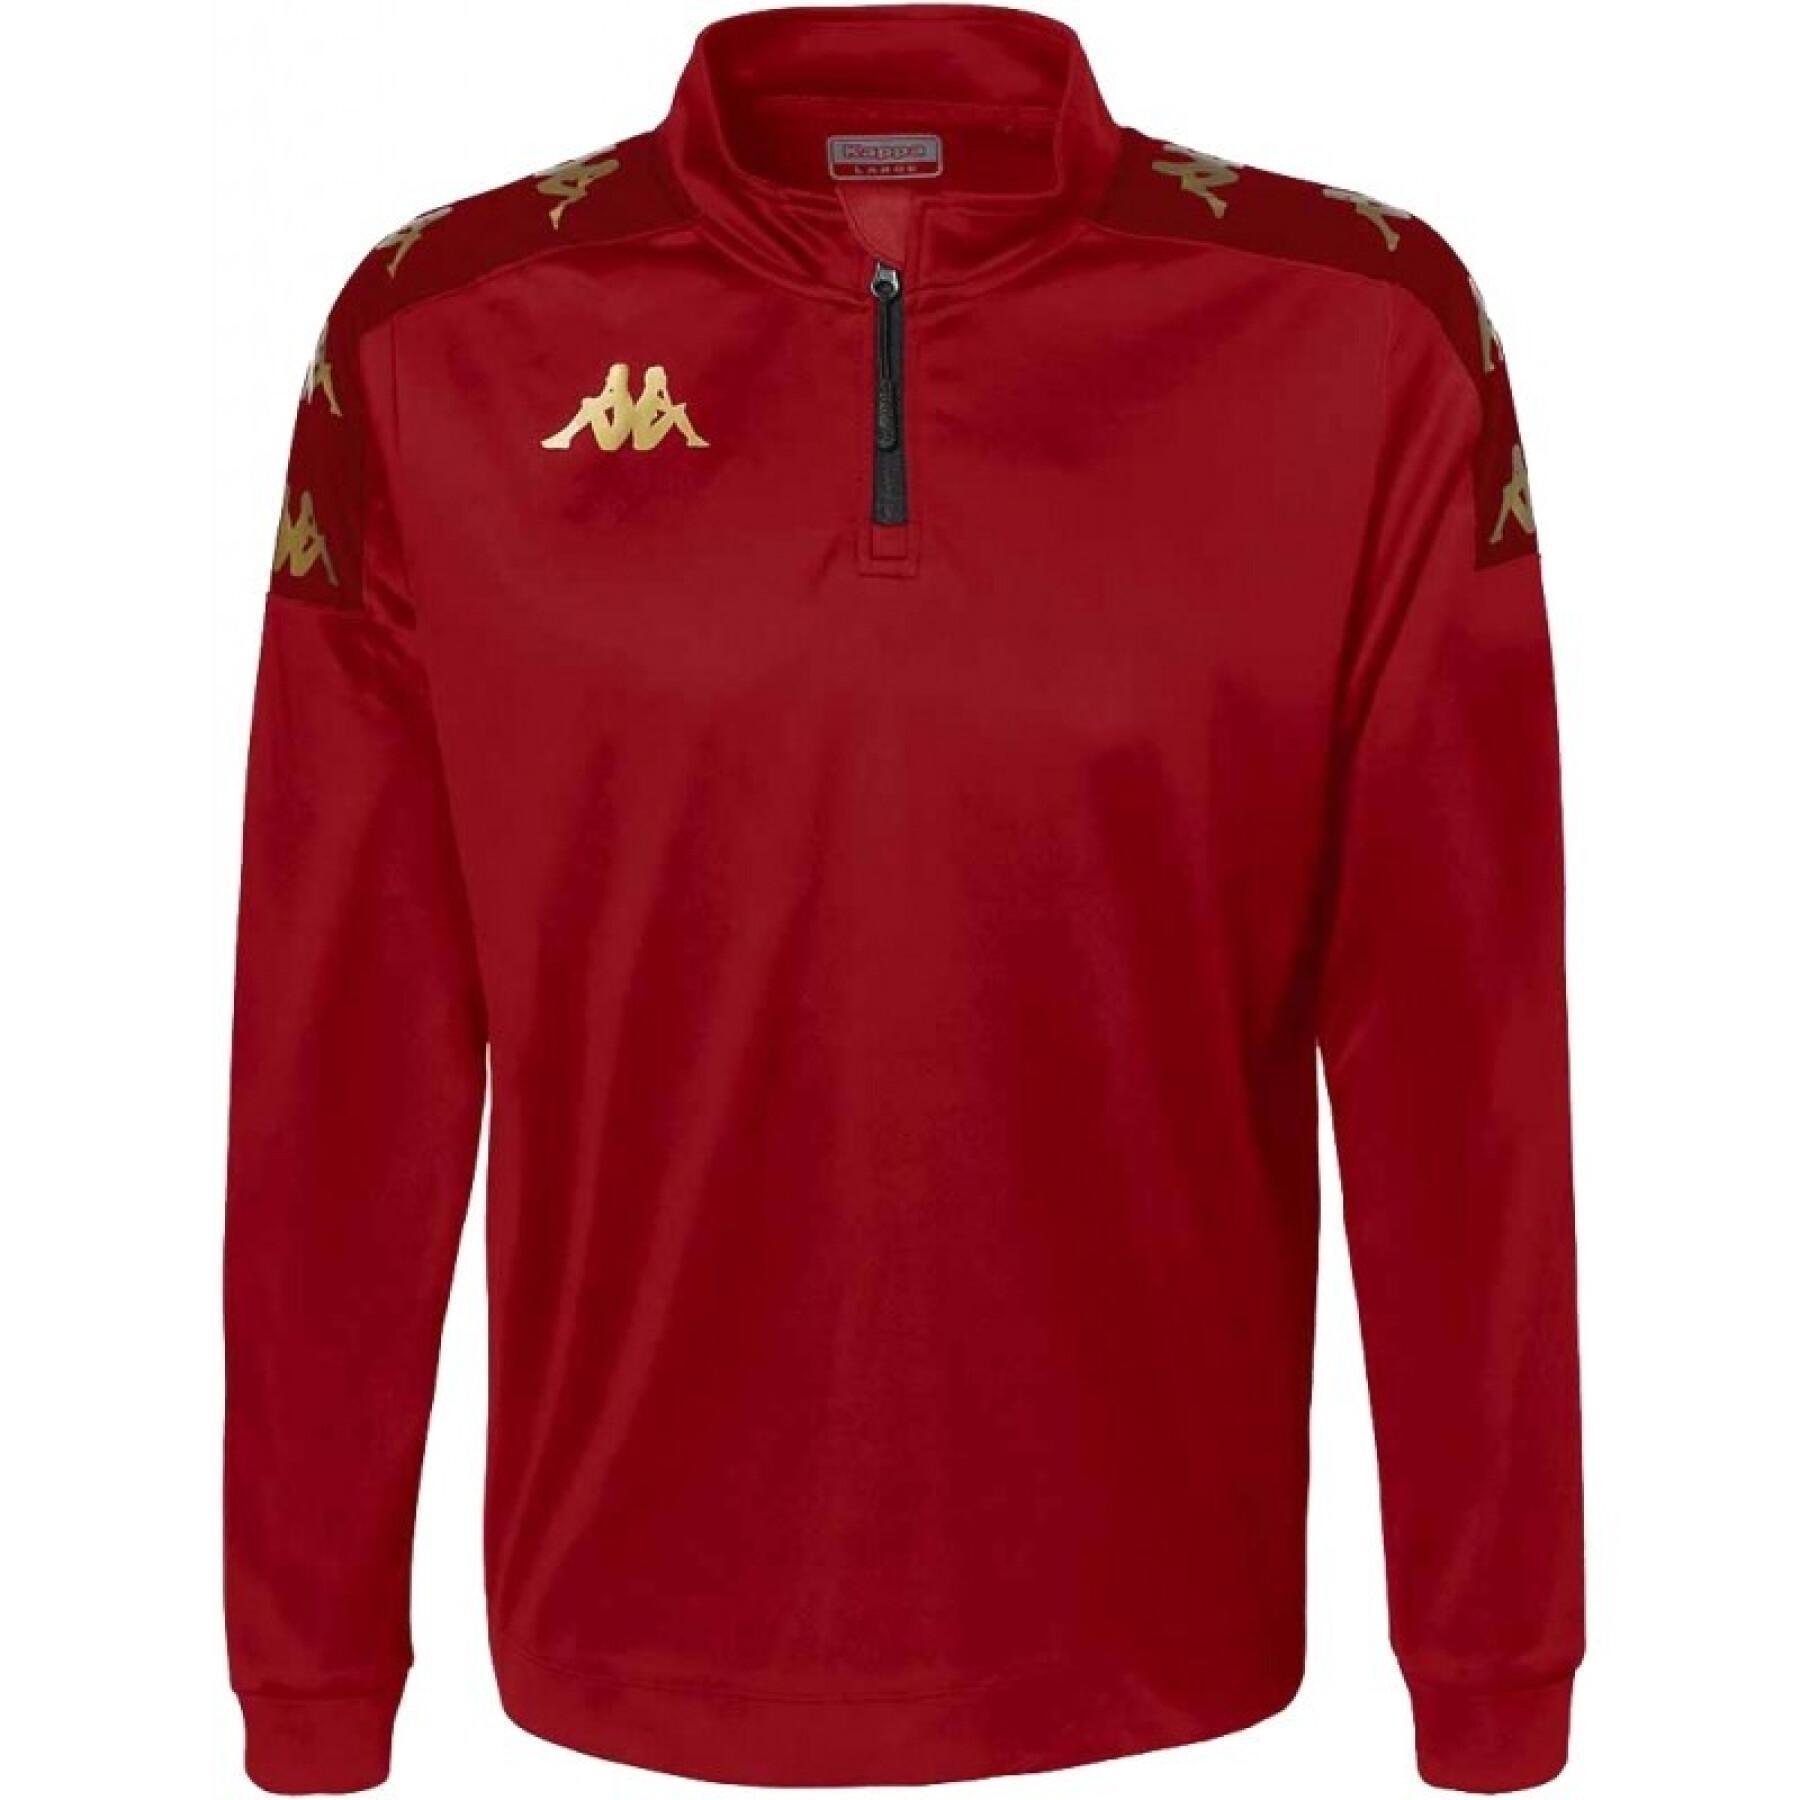 Horndean FC - Gassolo 1/4 Zip - Red